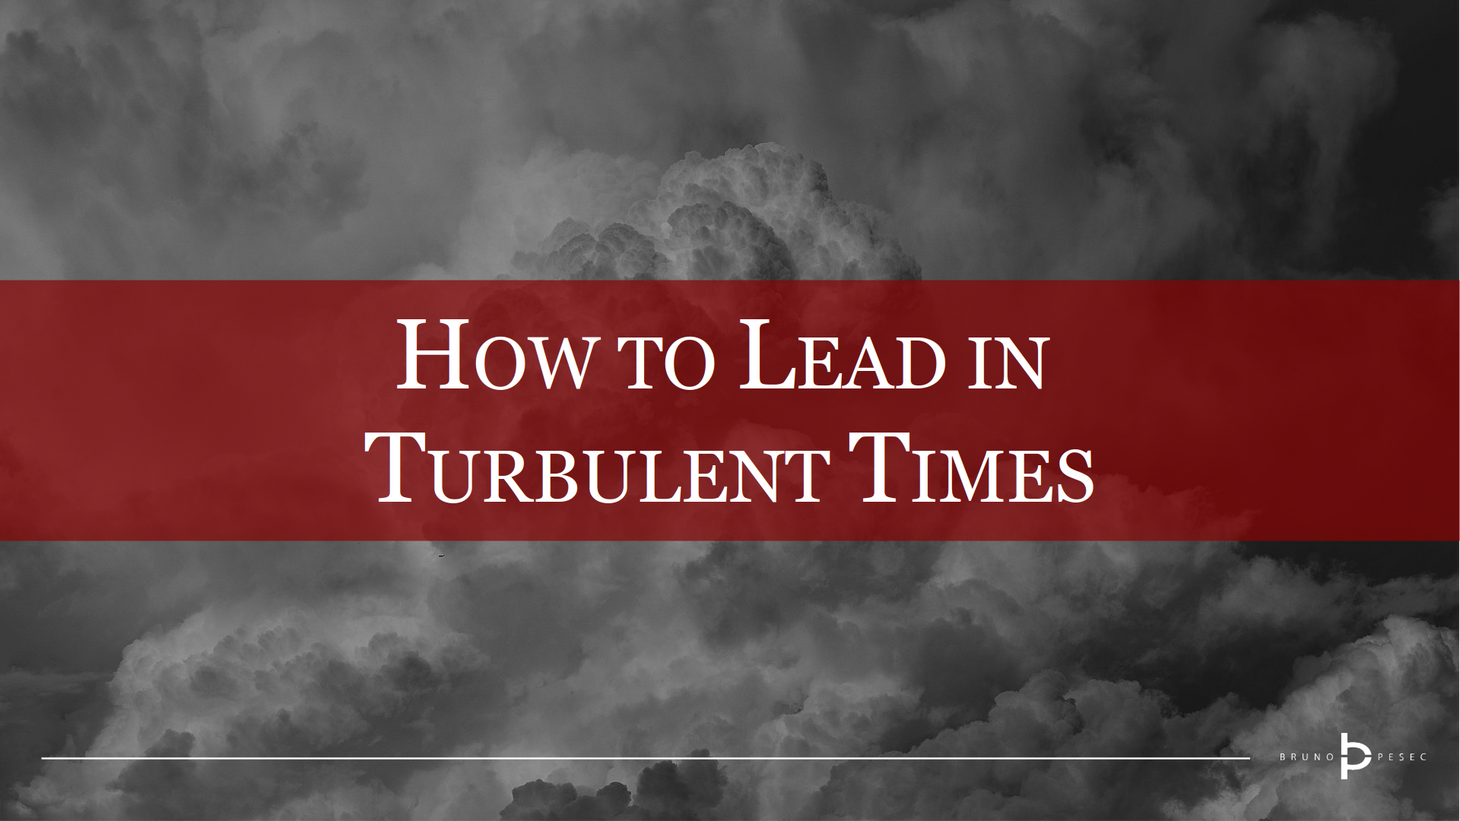 How to lead in turbulent times